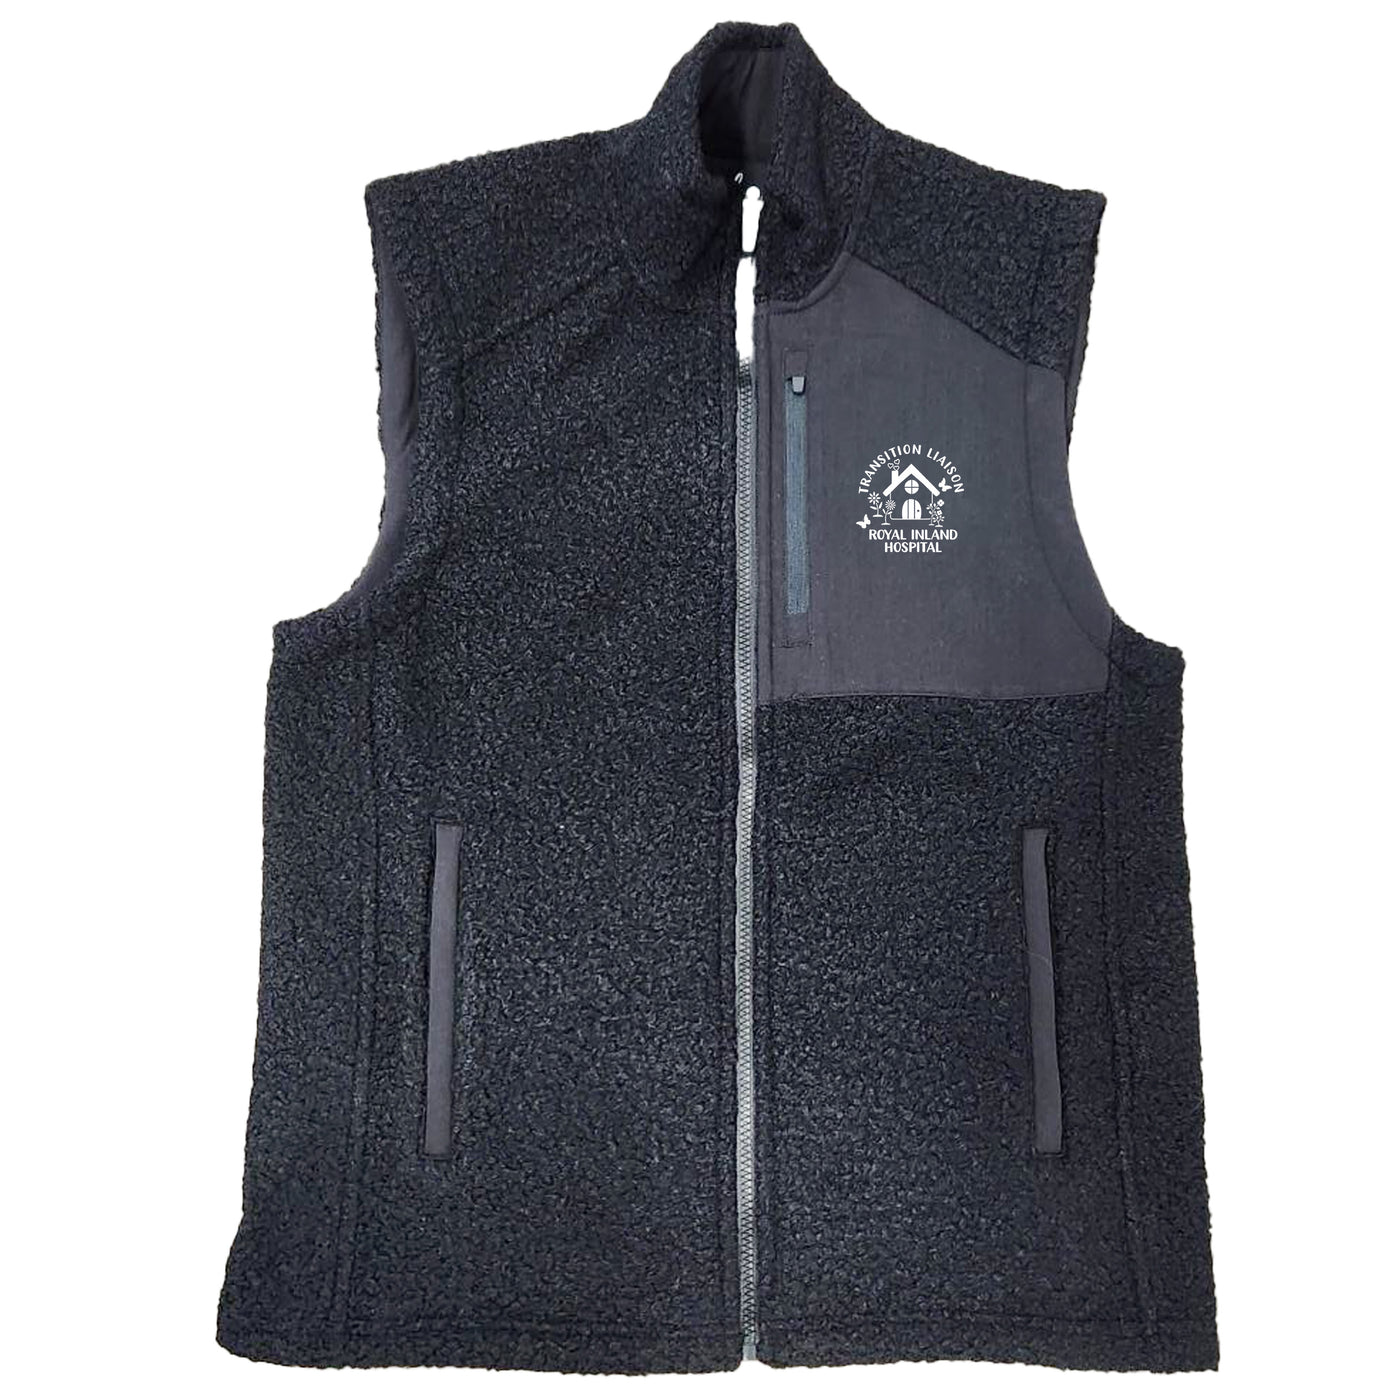 Royal Inland Hospital Transition Liaison - Round 2 - Code Cozy Vest